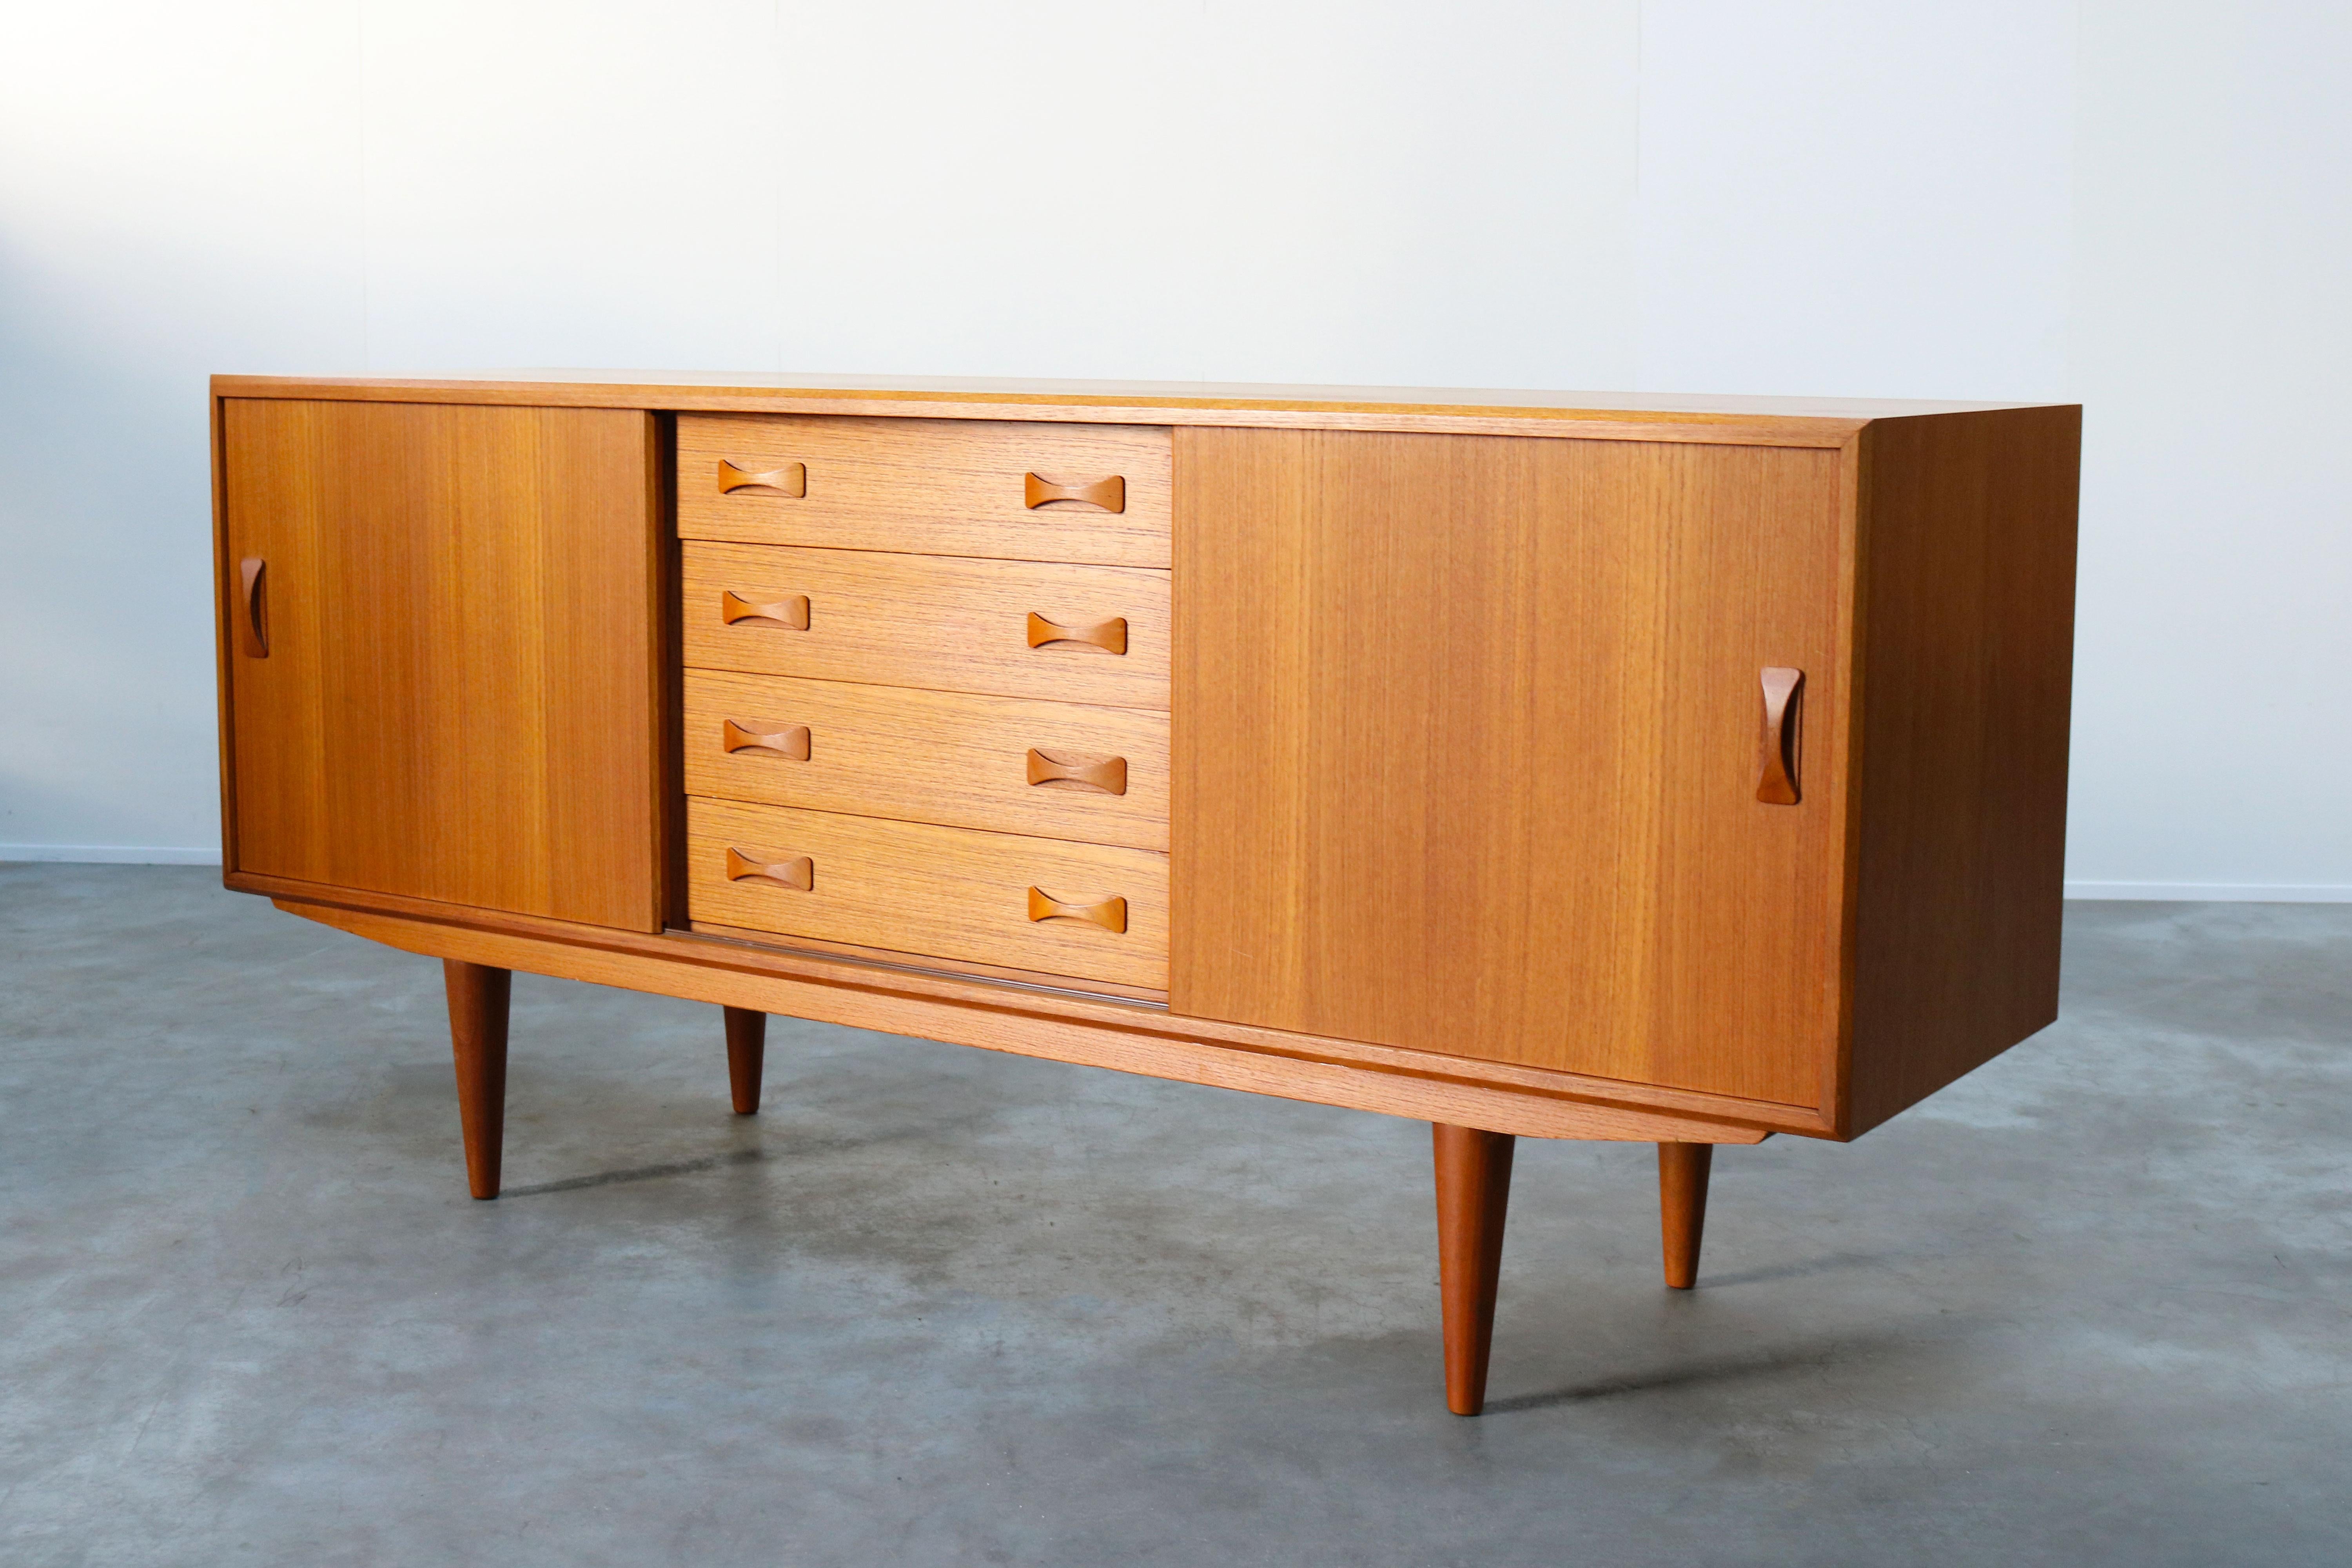 Danish teak sideboard/credenza designed by Clausen & son in the 1960s. Wonderful sculpted handgrips and clean design. The sideboard has four drawers, sliding doors and plenty of storage space. A wonderful example of Danish modern design. Sideboard